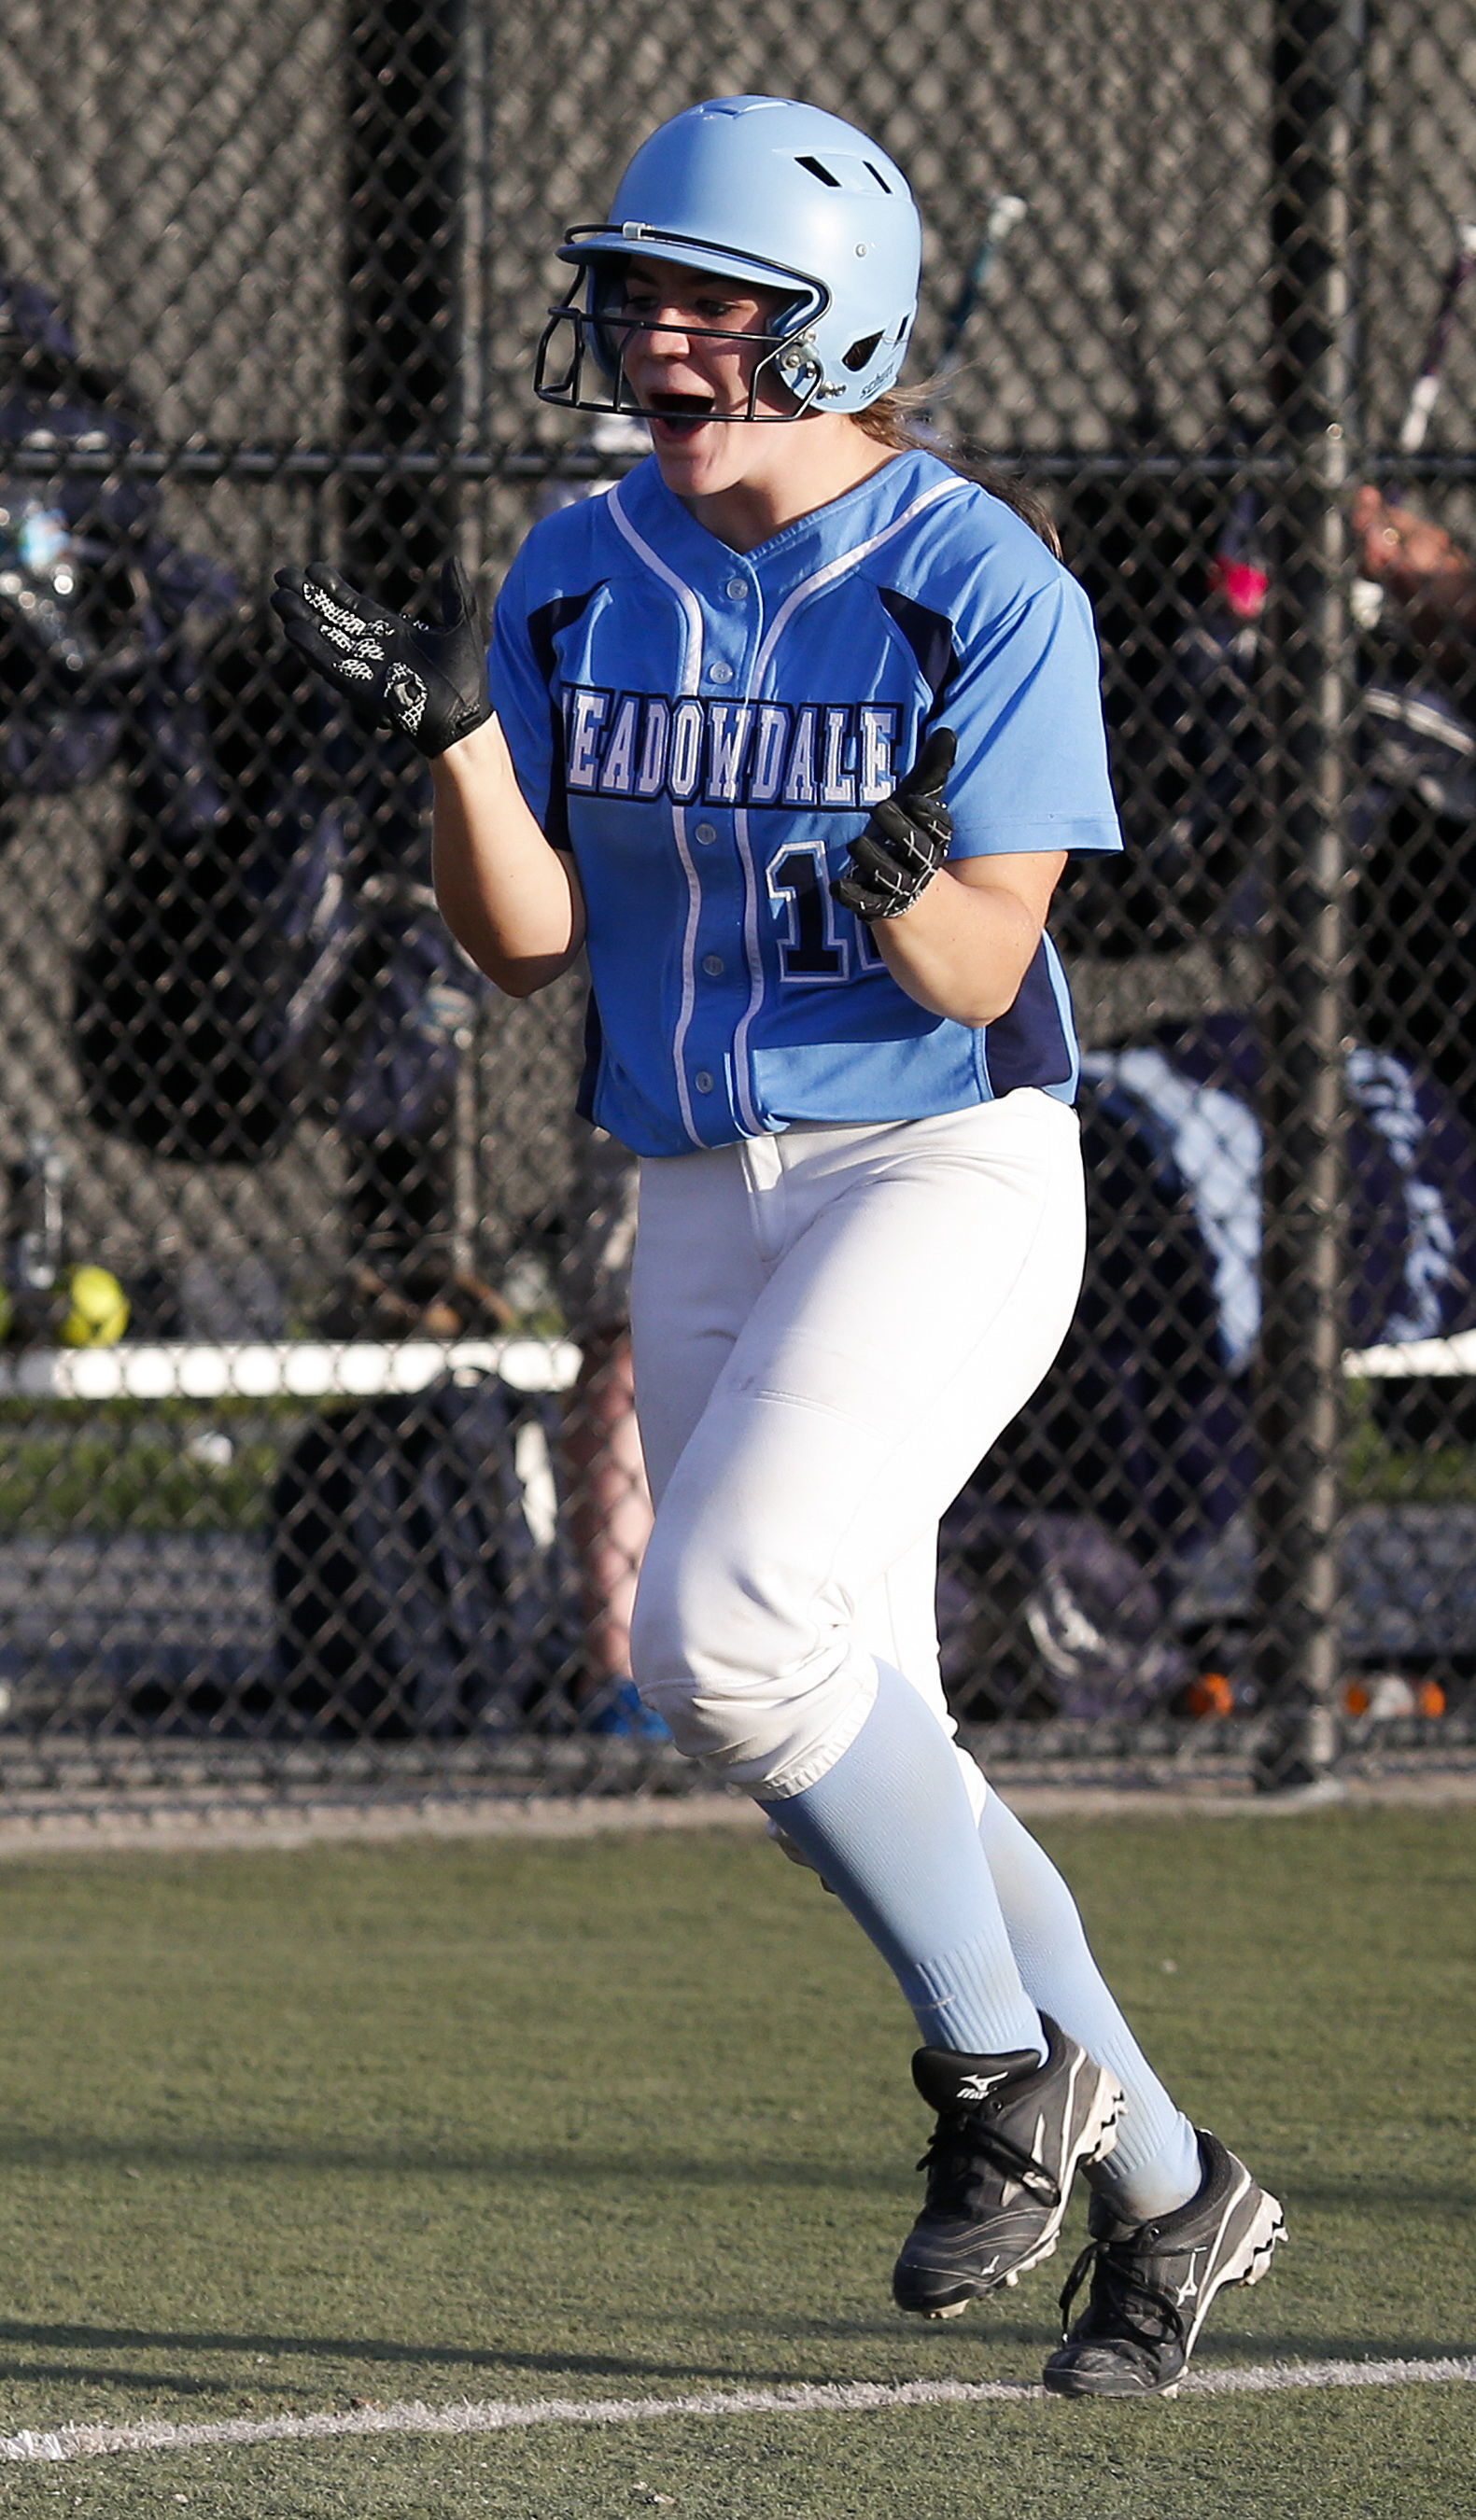 Meadowdale’s Emma Helm cheers as she rounds the bases after hitting a home run during a 3A District 1 semifinal game against Marysville Pilchuck on May 17 in Everett.